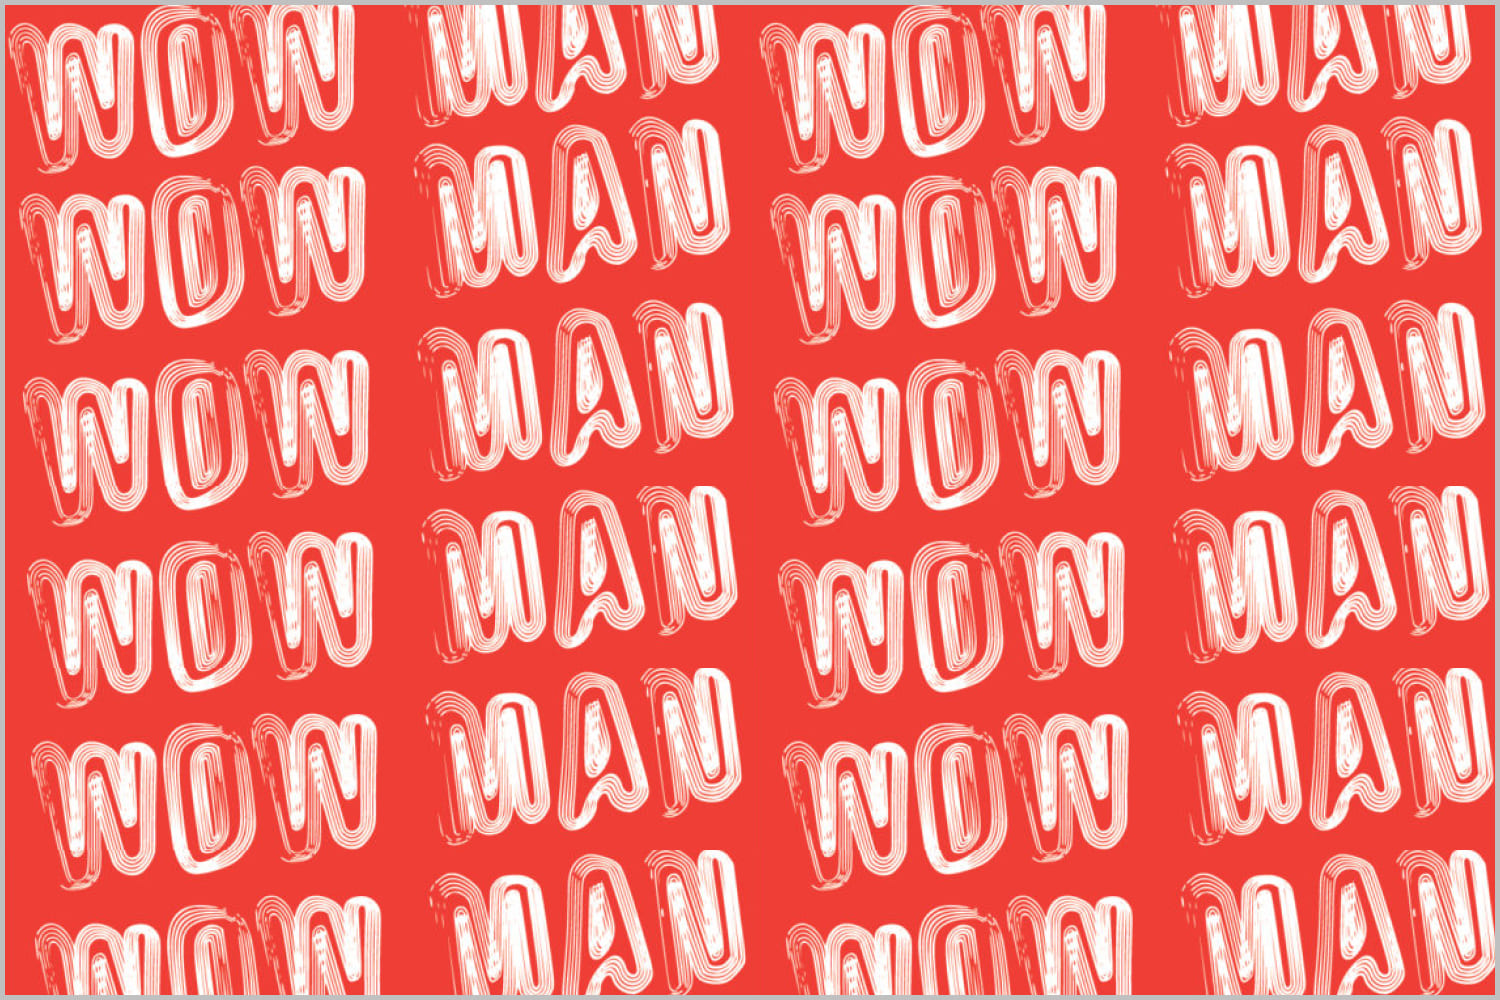 Wow man Words in white on a red background.